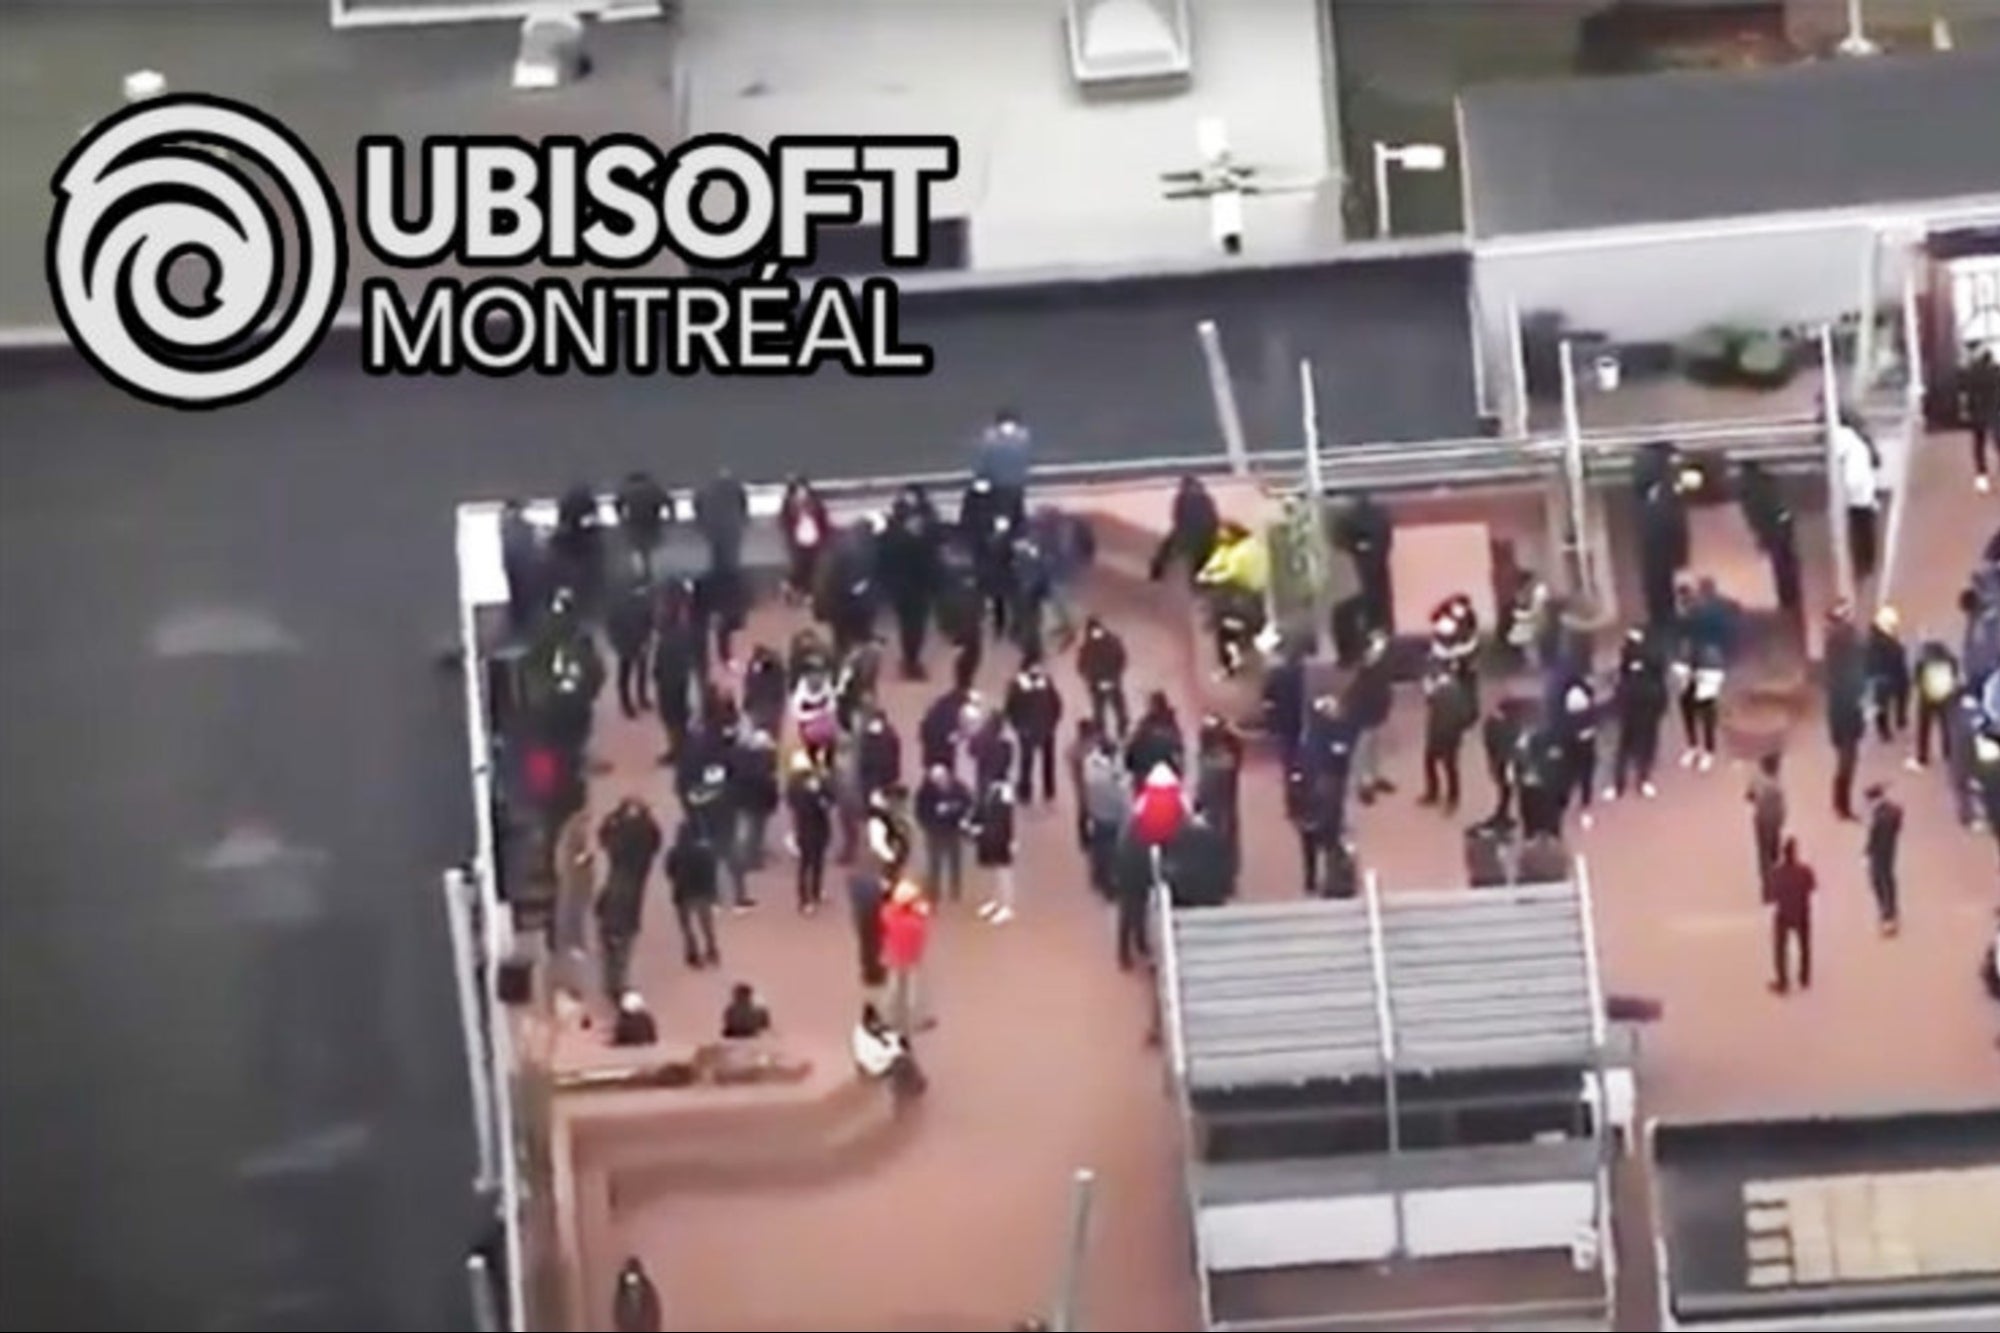 Hostage reported at Ubisoft offices in Montreal